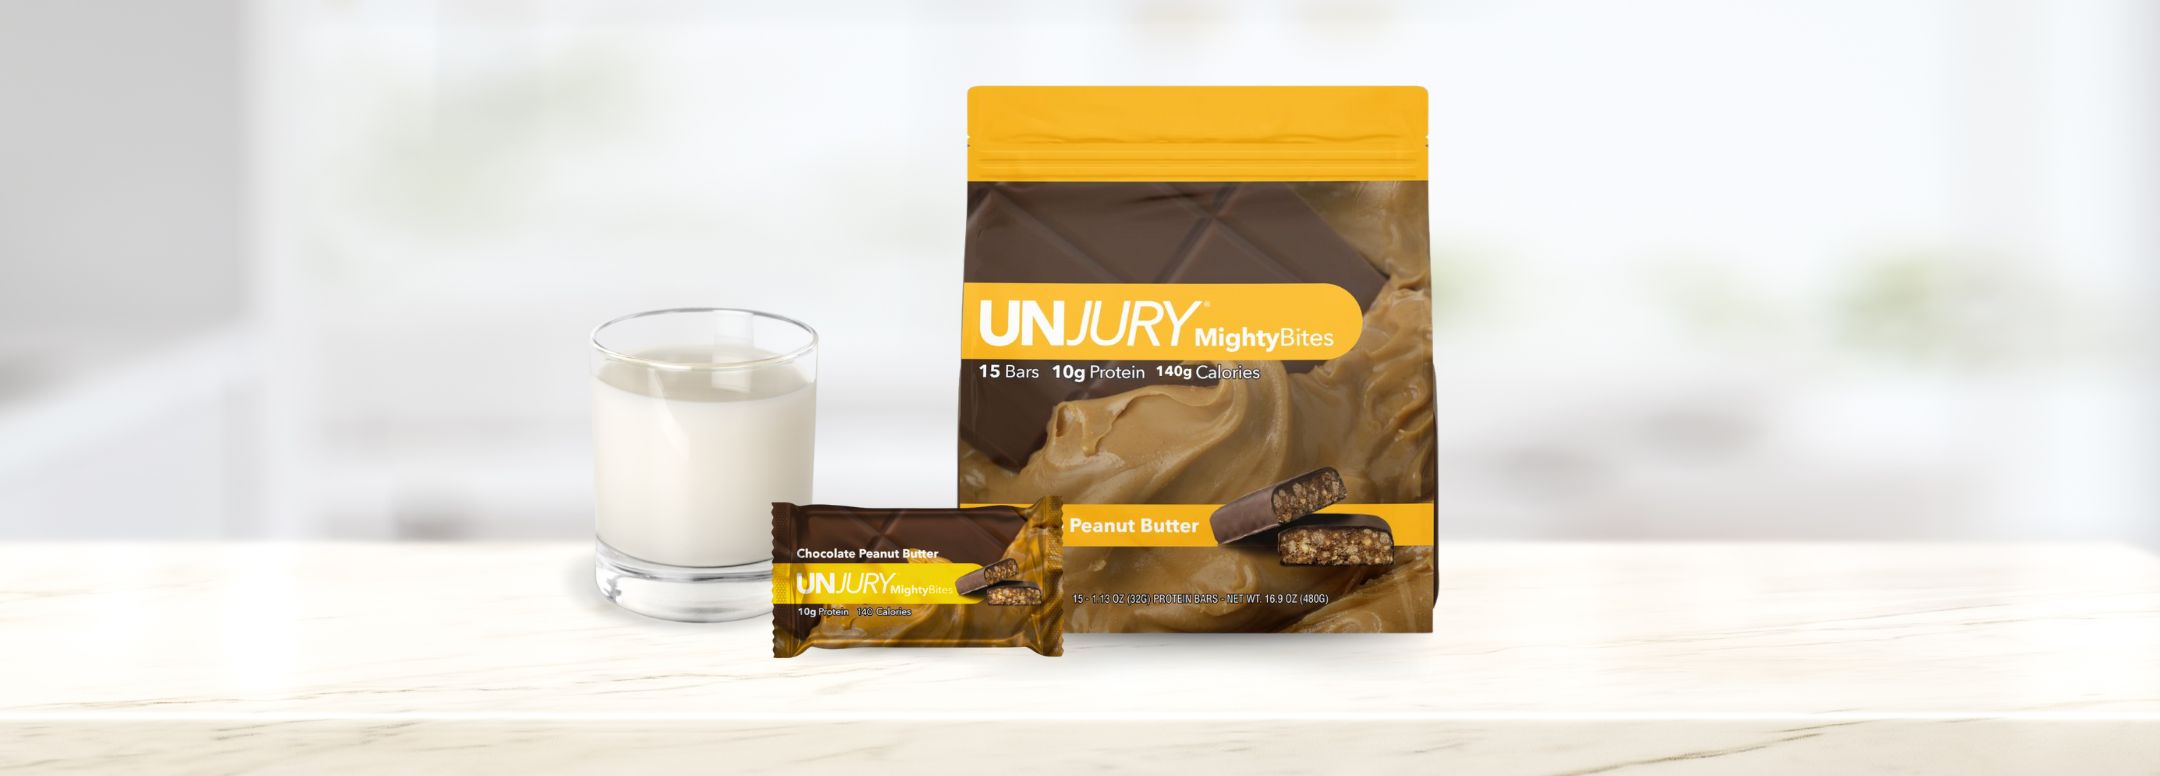 Unjury Protein Chocolate Peanut Butter Protein Bars. 10g of protein and 140 calories per bar. 15 bars per bag.